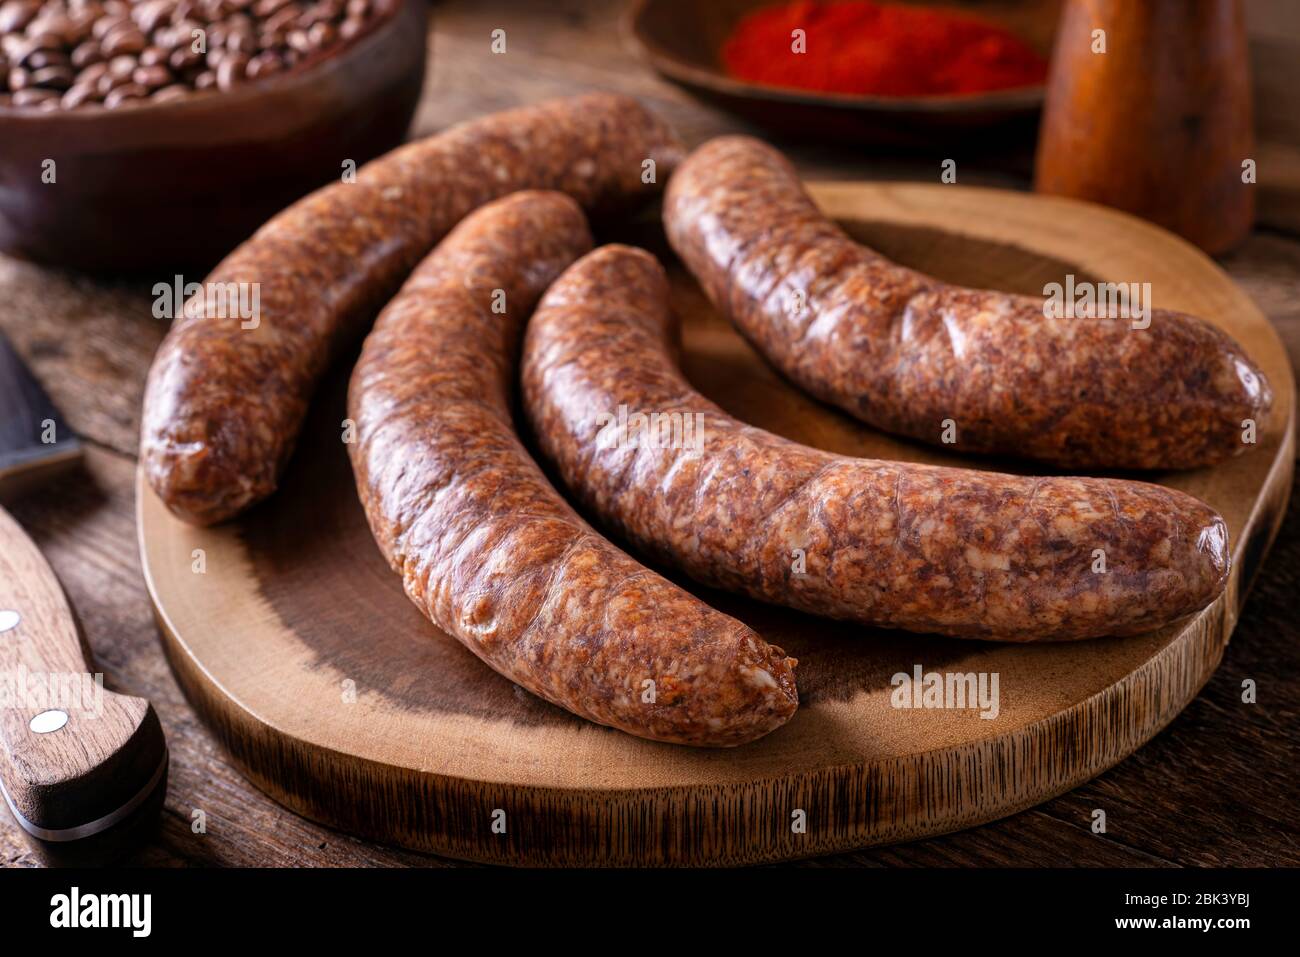 Freshly made rustic sausages on a wood cutting board. Stock Photo